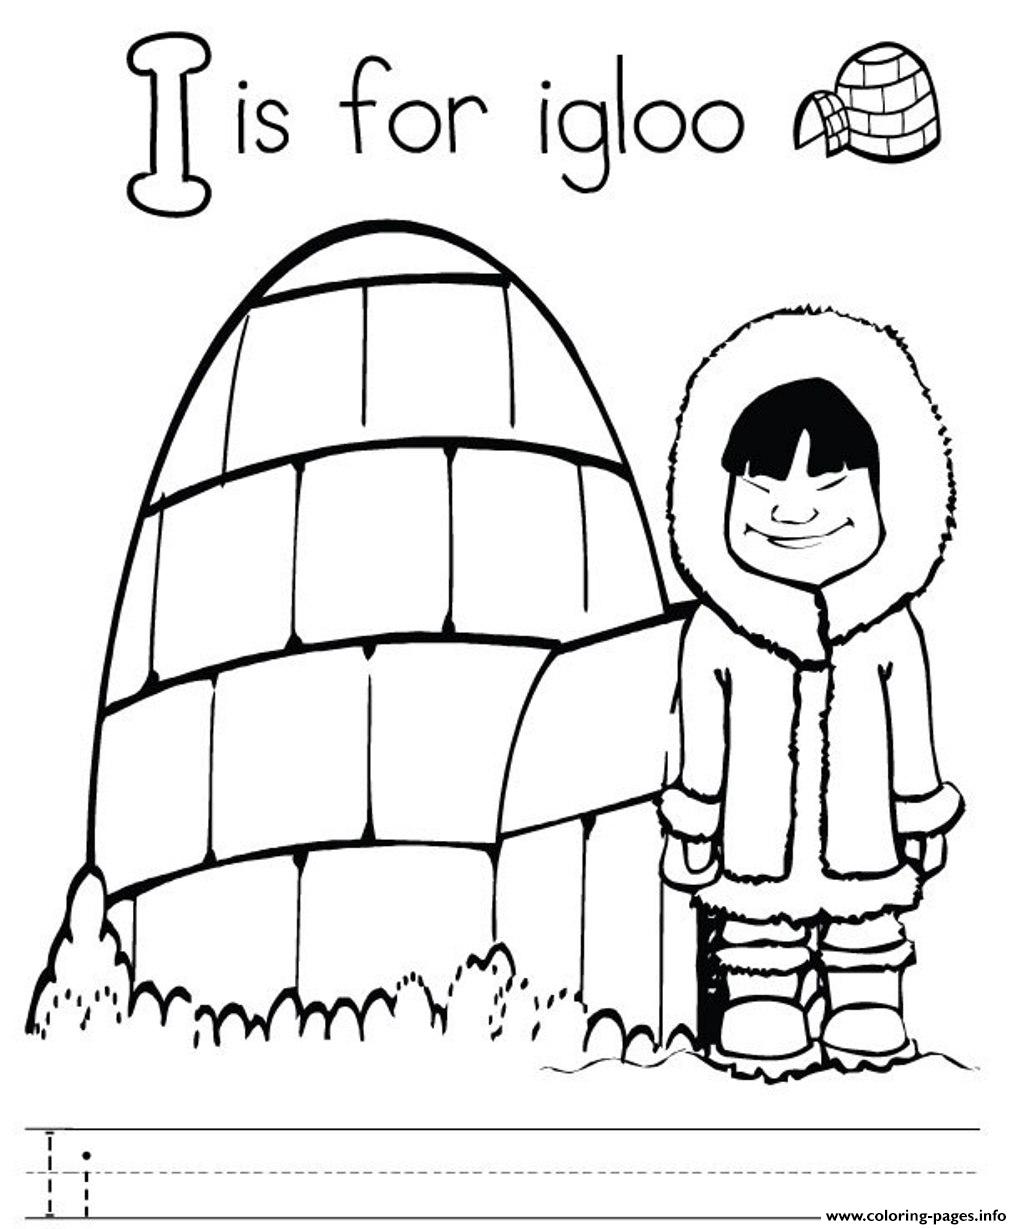 images of igloo for coloring pages - photo #21